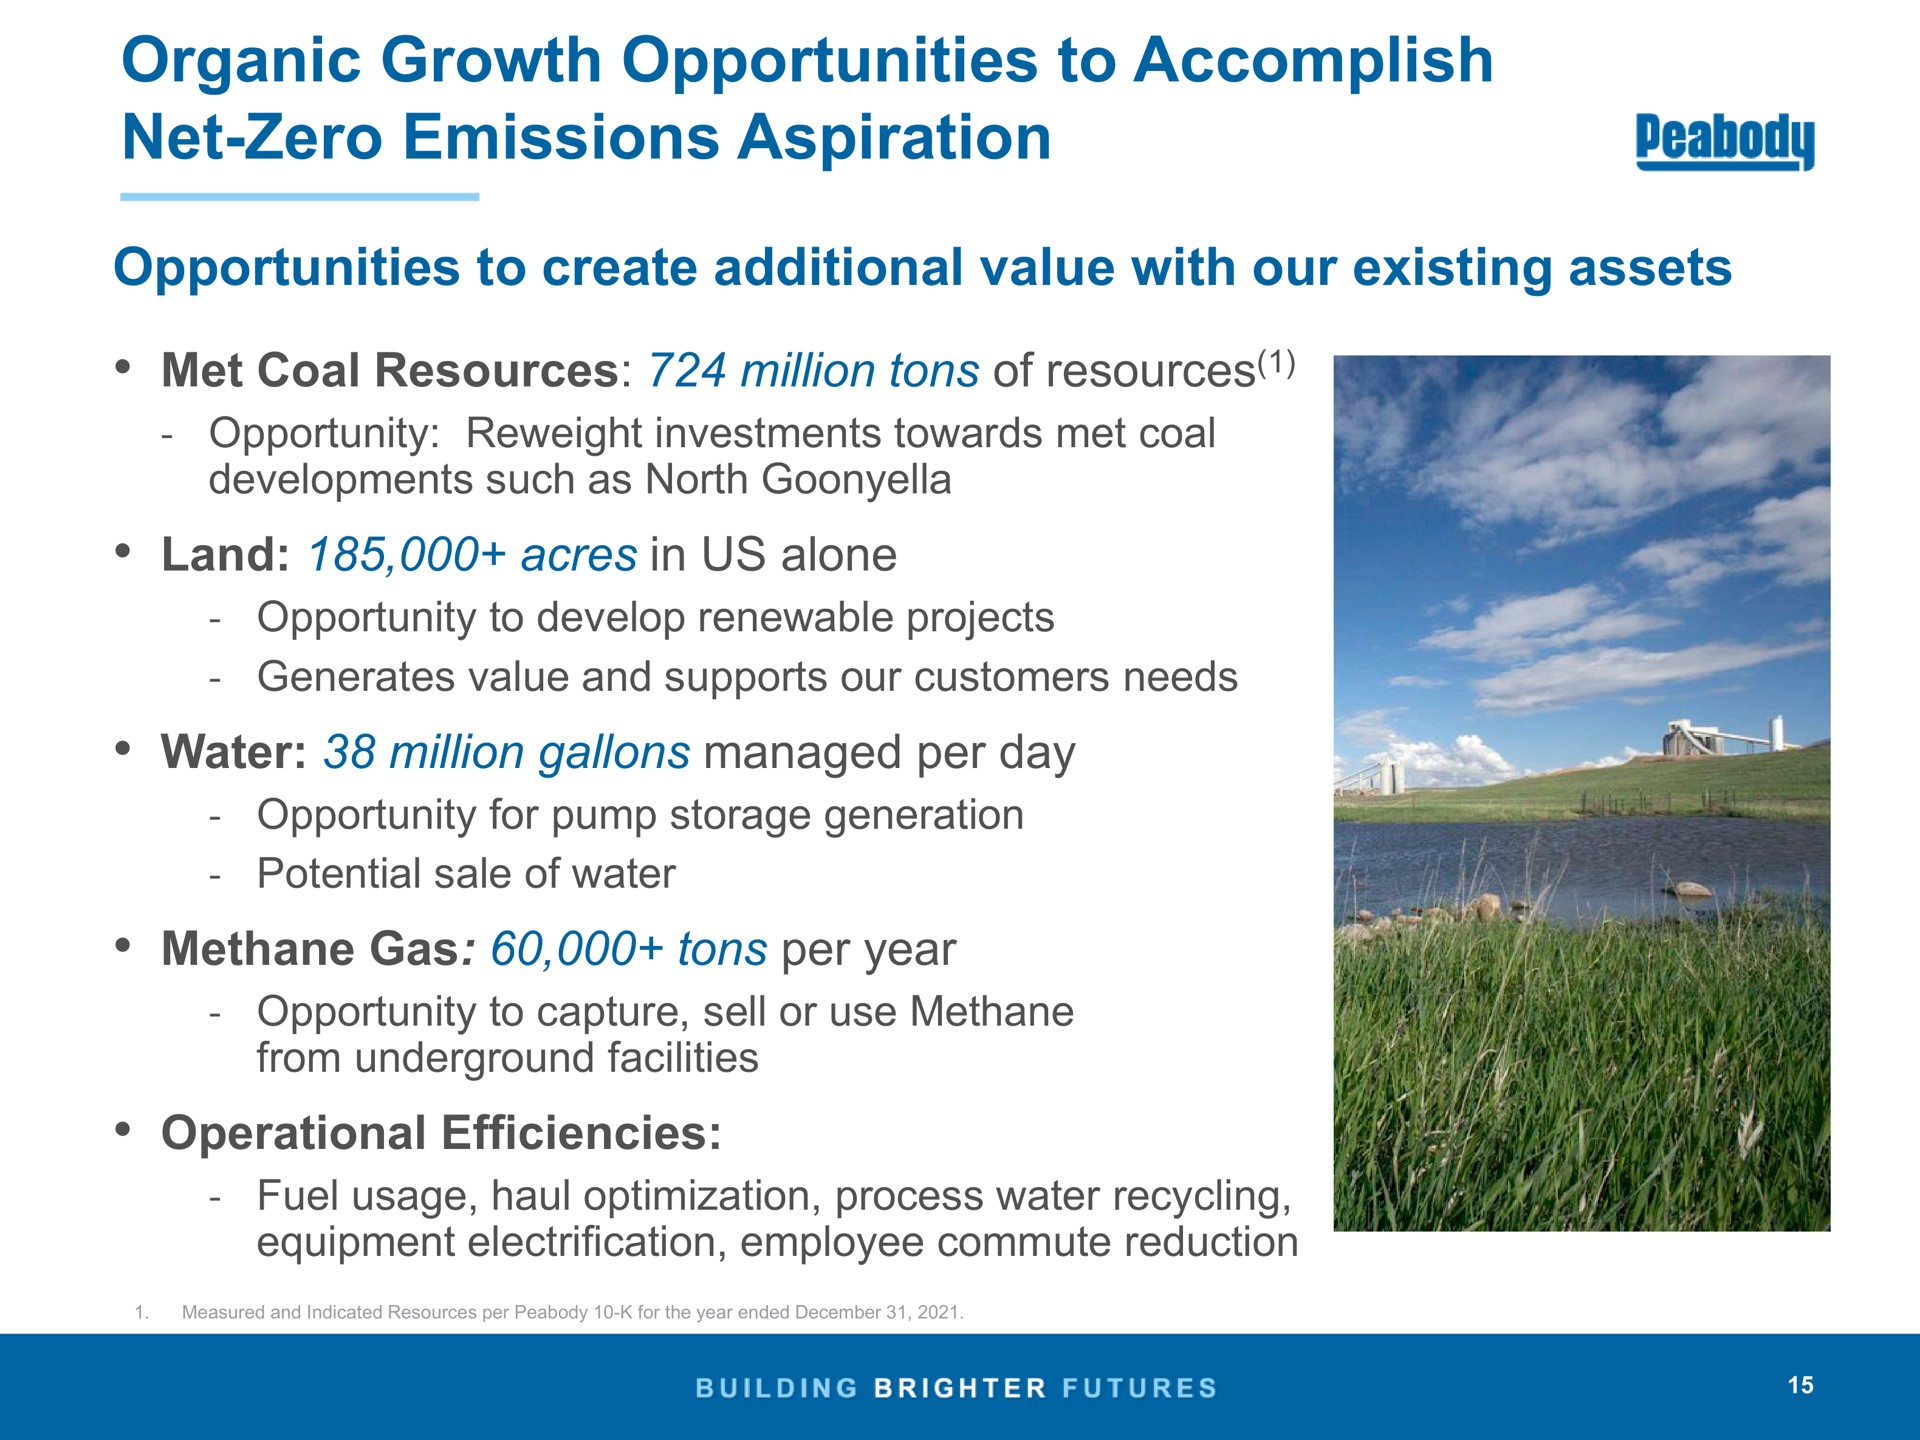 organic growth opportunities to accomplish net zero emissions aspiration opportunities to create additional value with our existing assets met coal resources million tons of resources land acres in us alone water million gallons managed per day methane gas tons per year operational efficiencies | Peabody Energy